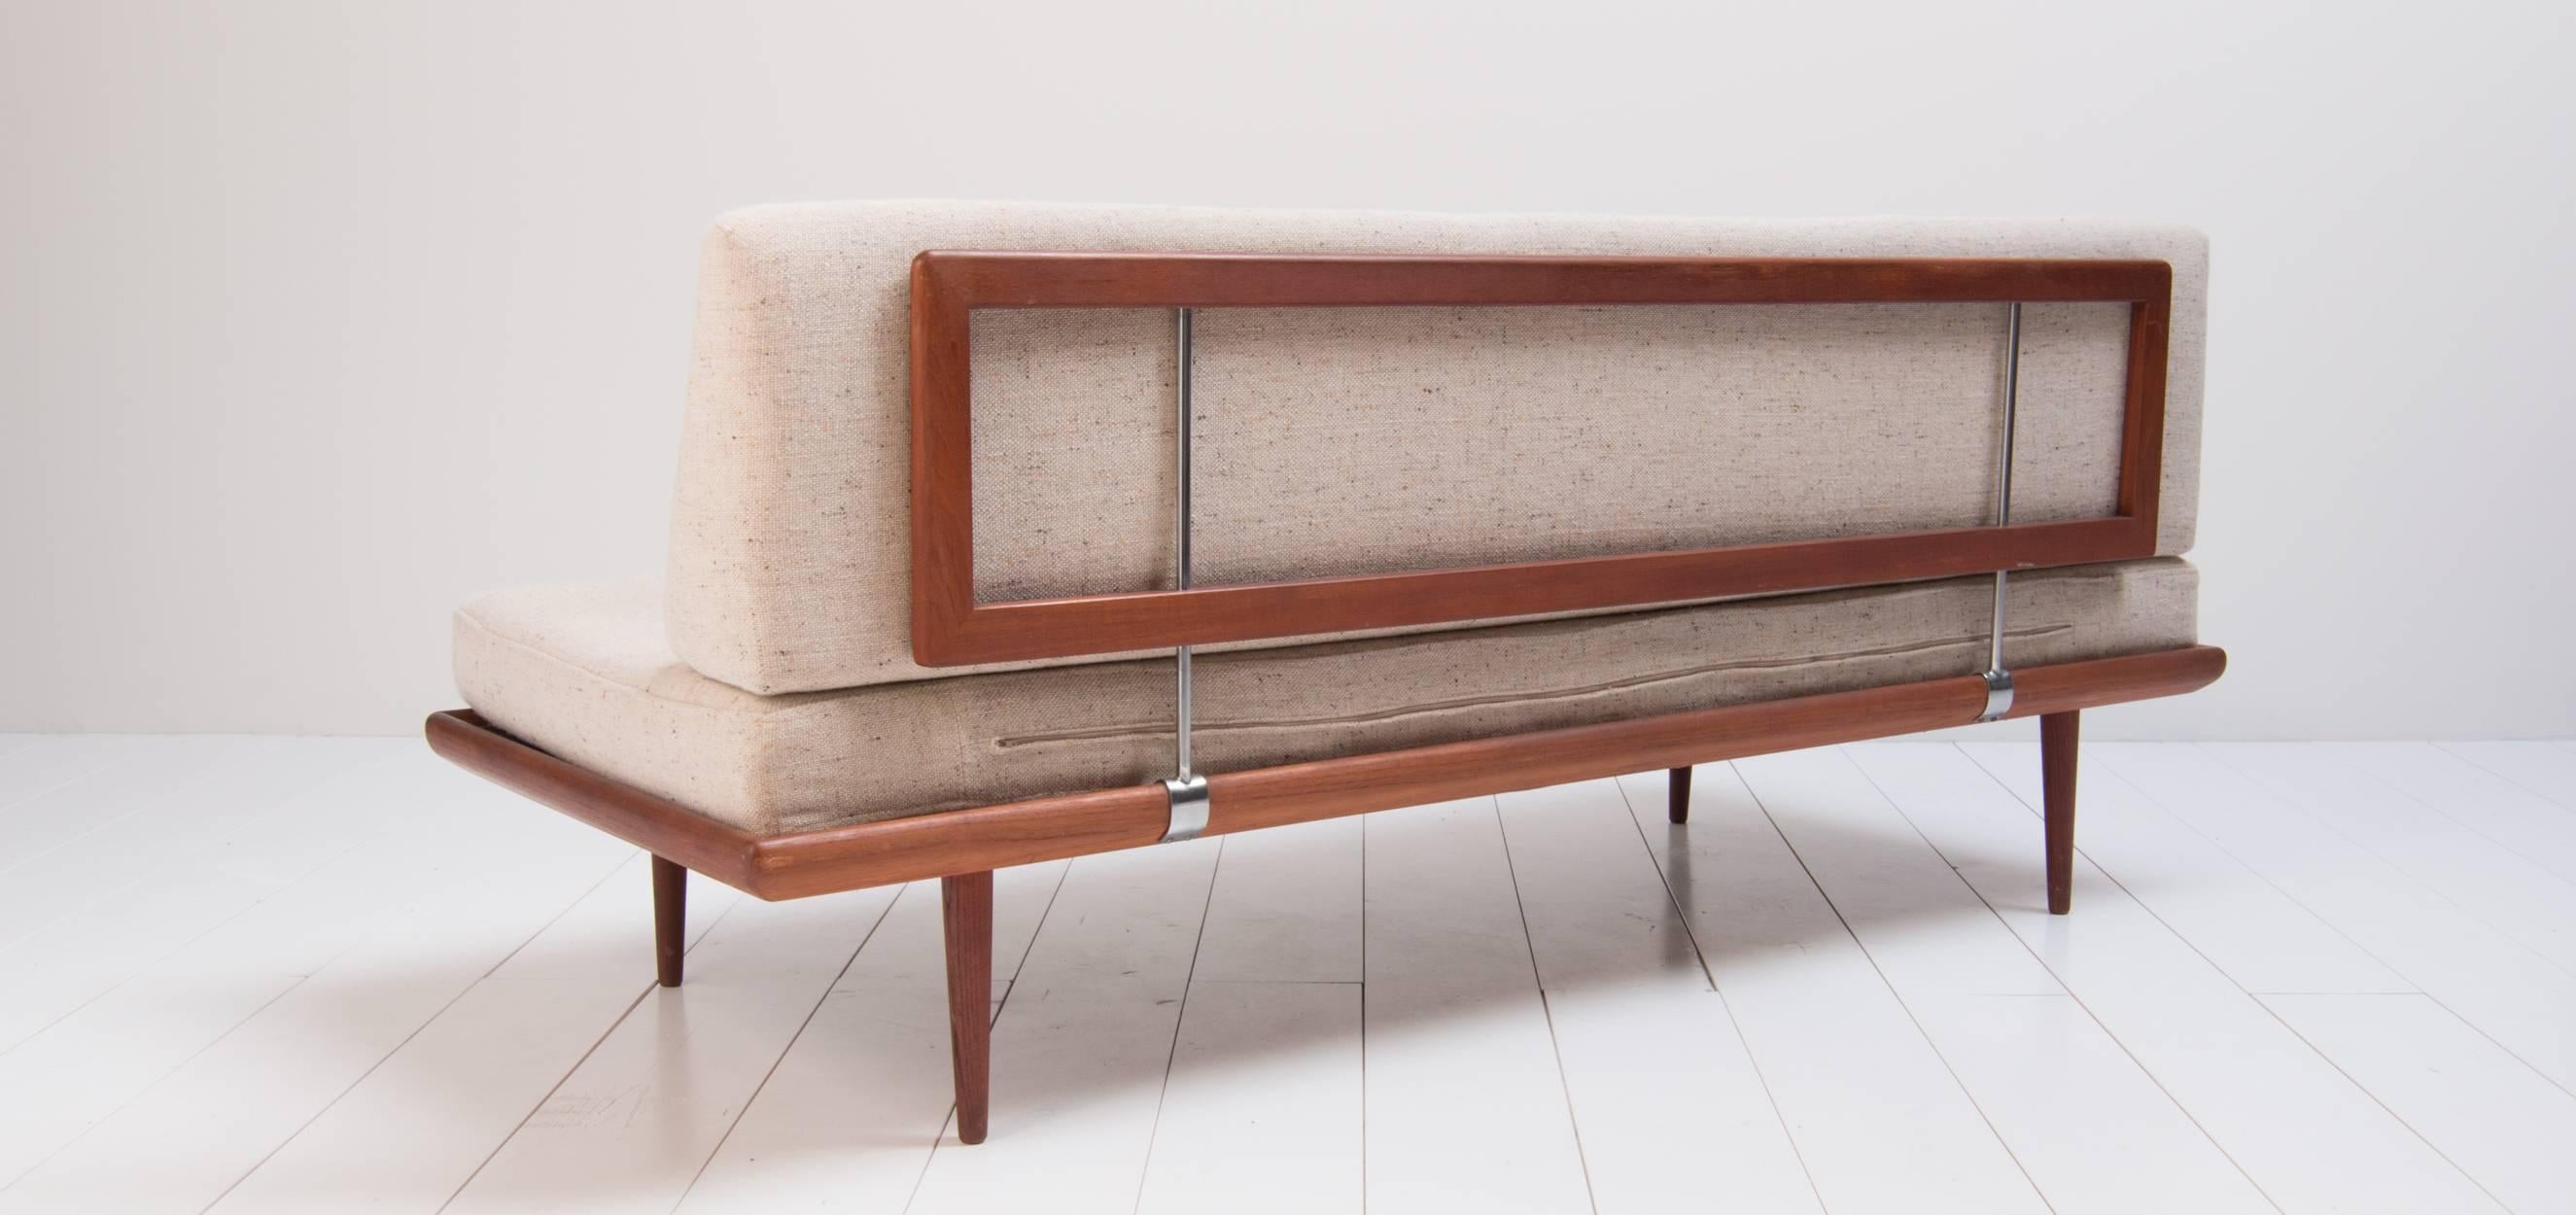 Scandinavian Modern Peter Hvidt Daybed Produced by France and Son in the 1960s